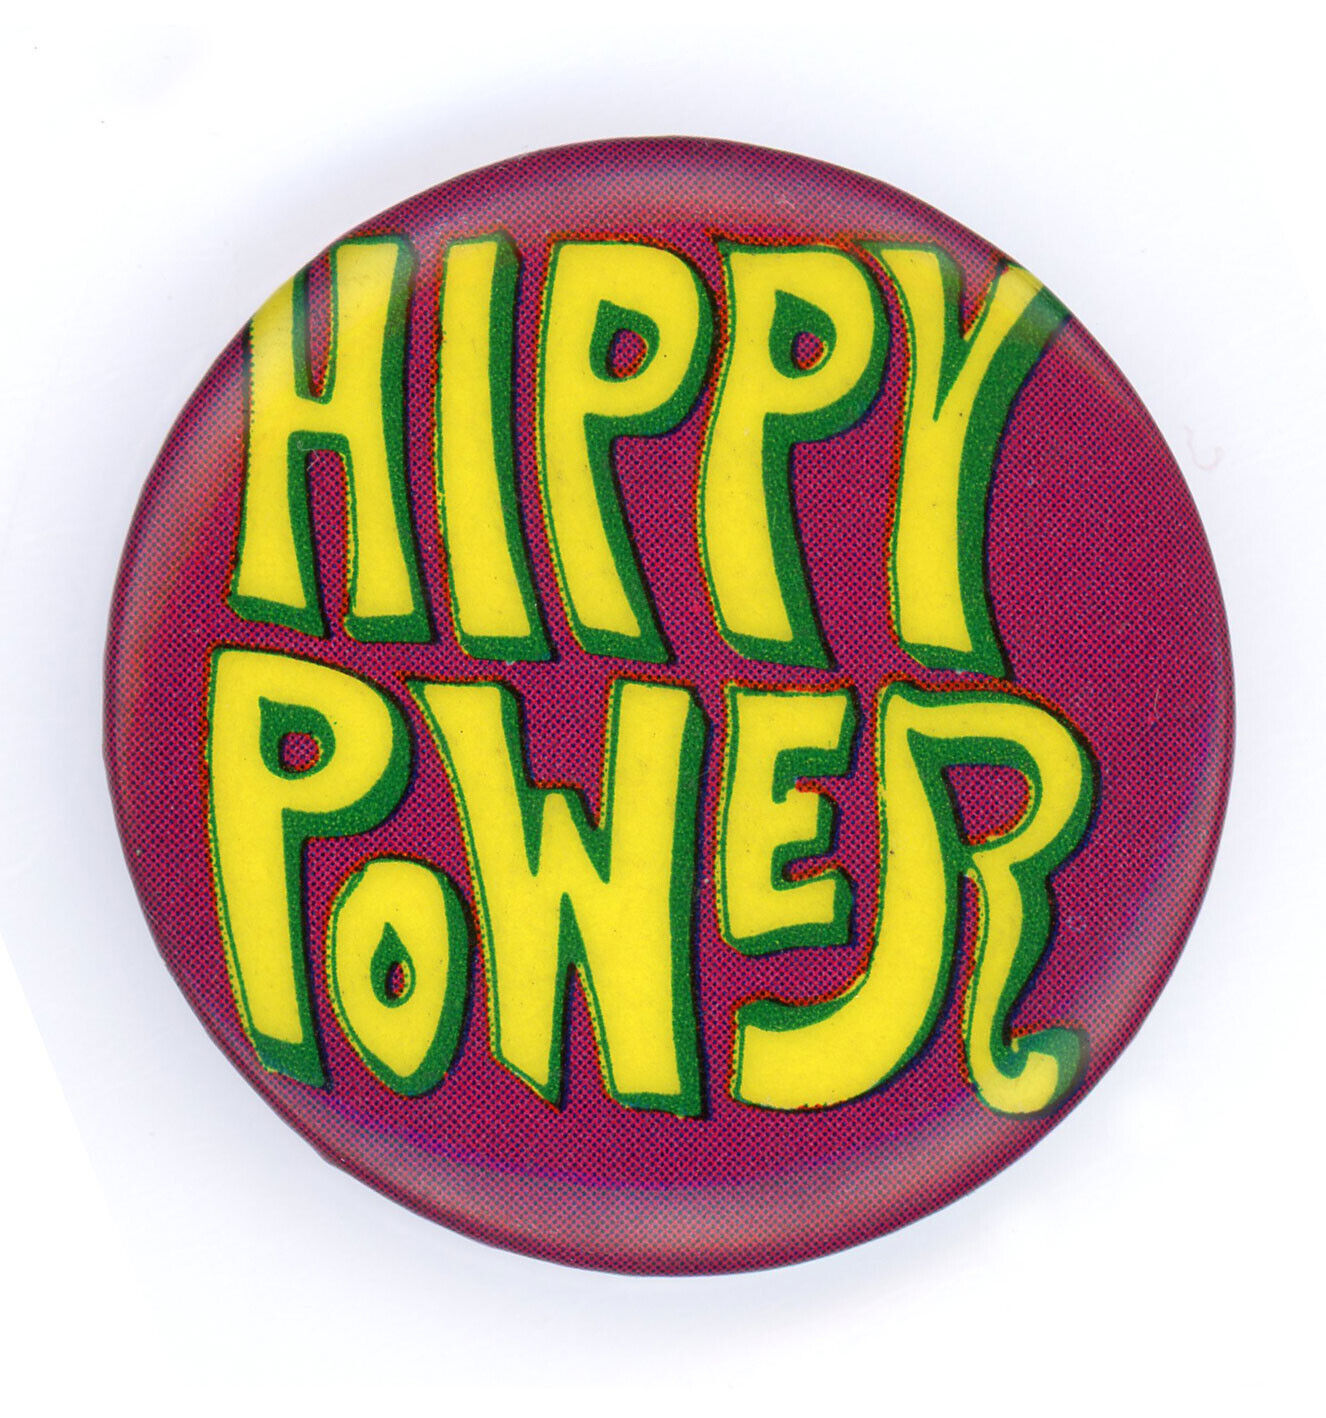 RARE Vintage 1960s HIPPY POWER Psychedelic Pin Back Button Counter Culture